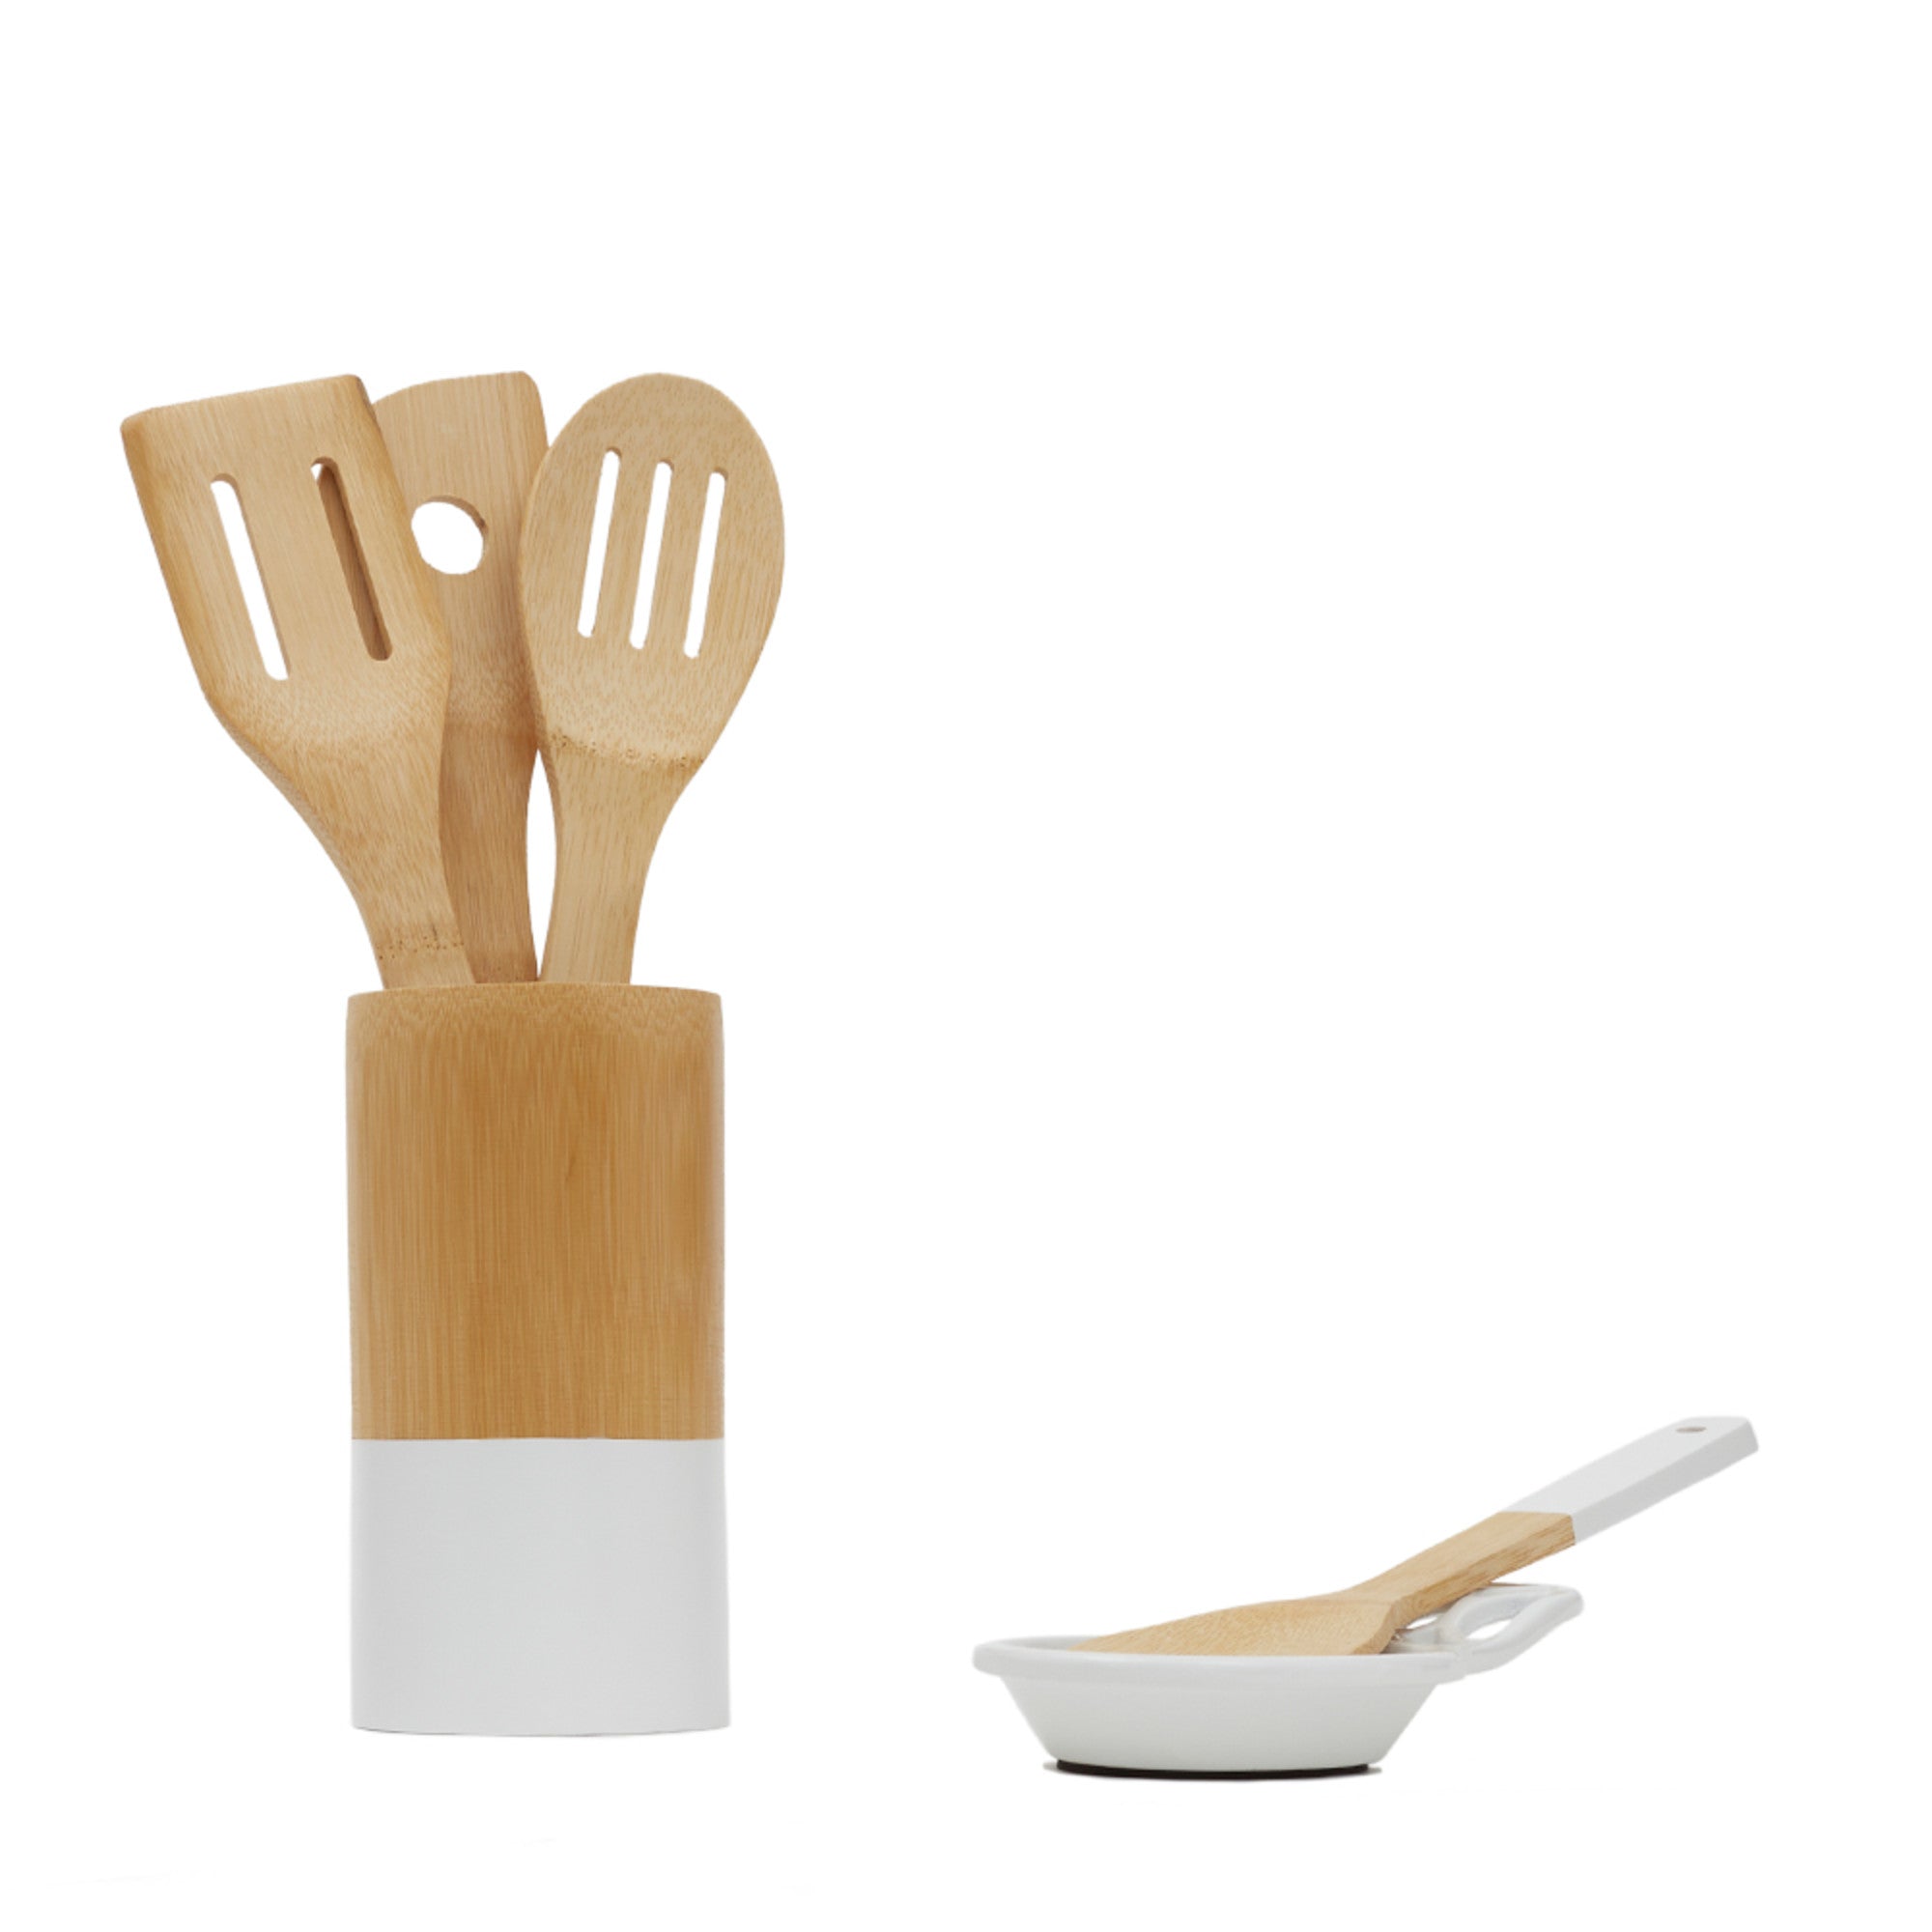 Home Basics 4 Piece Bamboo Cooking Utensil Set with Holder - Silver